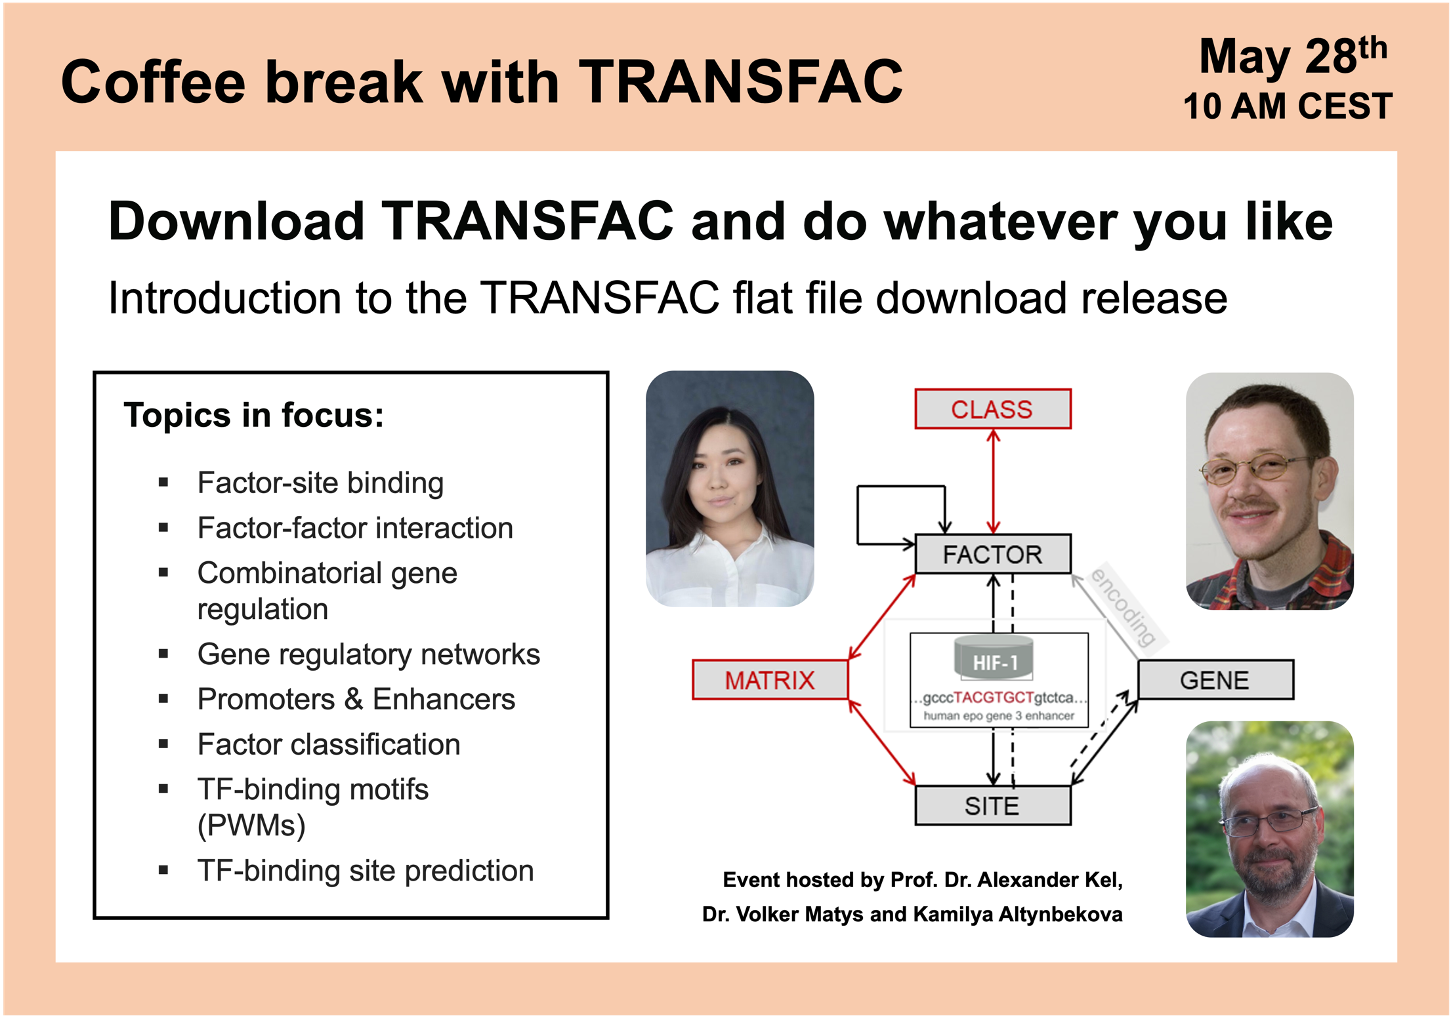 Download TRANSFAC and do whatever you like